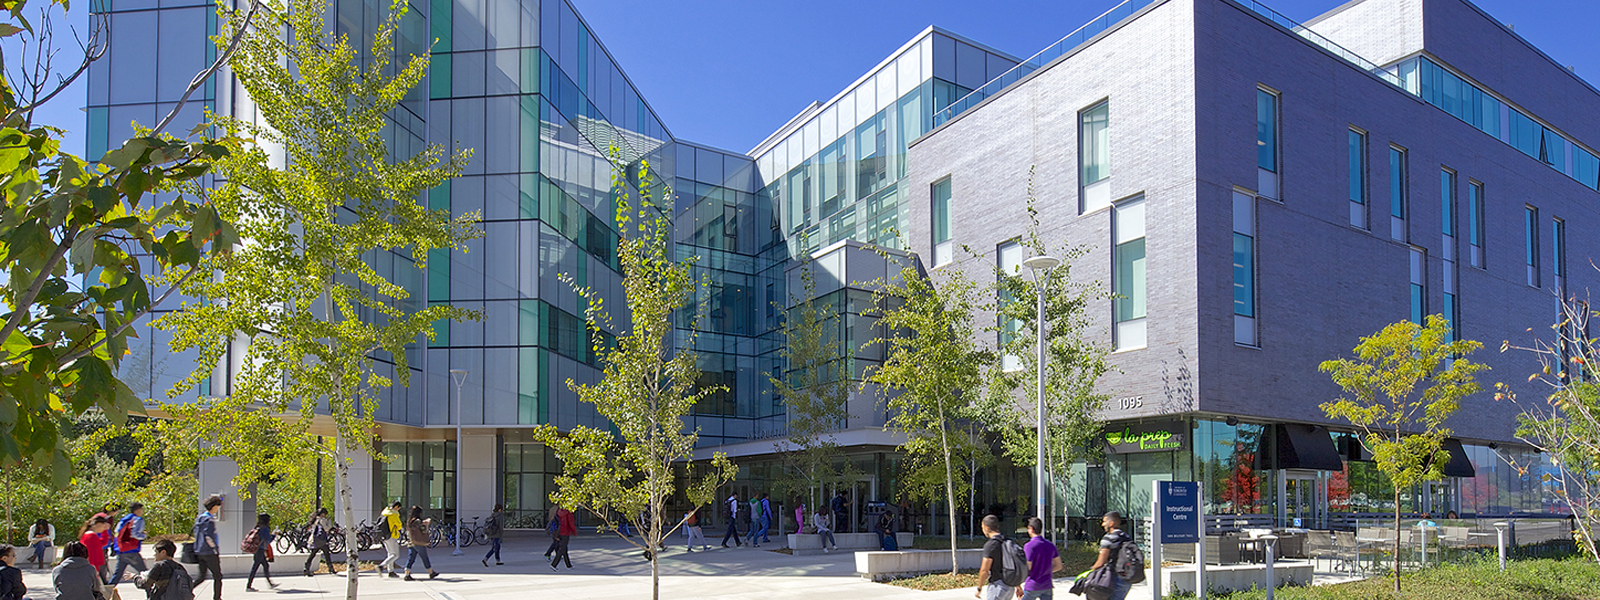 The exterior of the Instructional Centre at U of T Scarborough in springtime